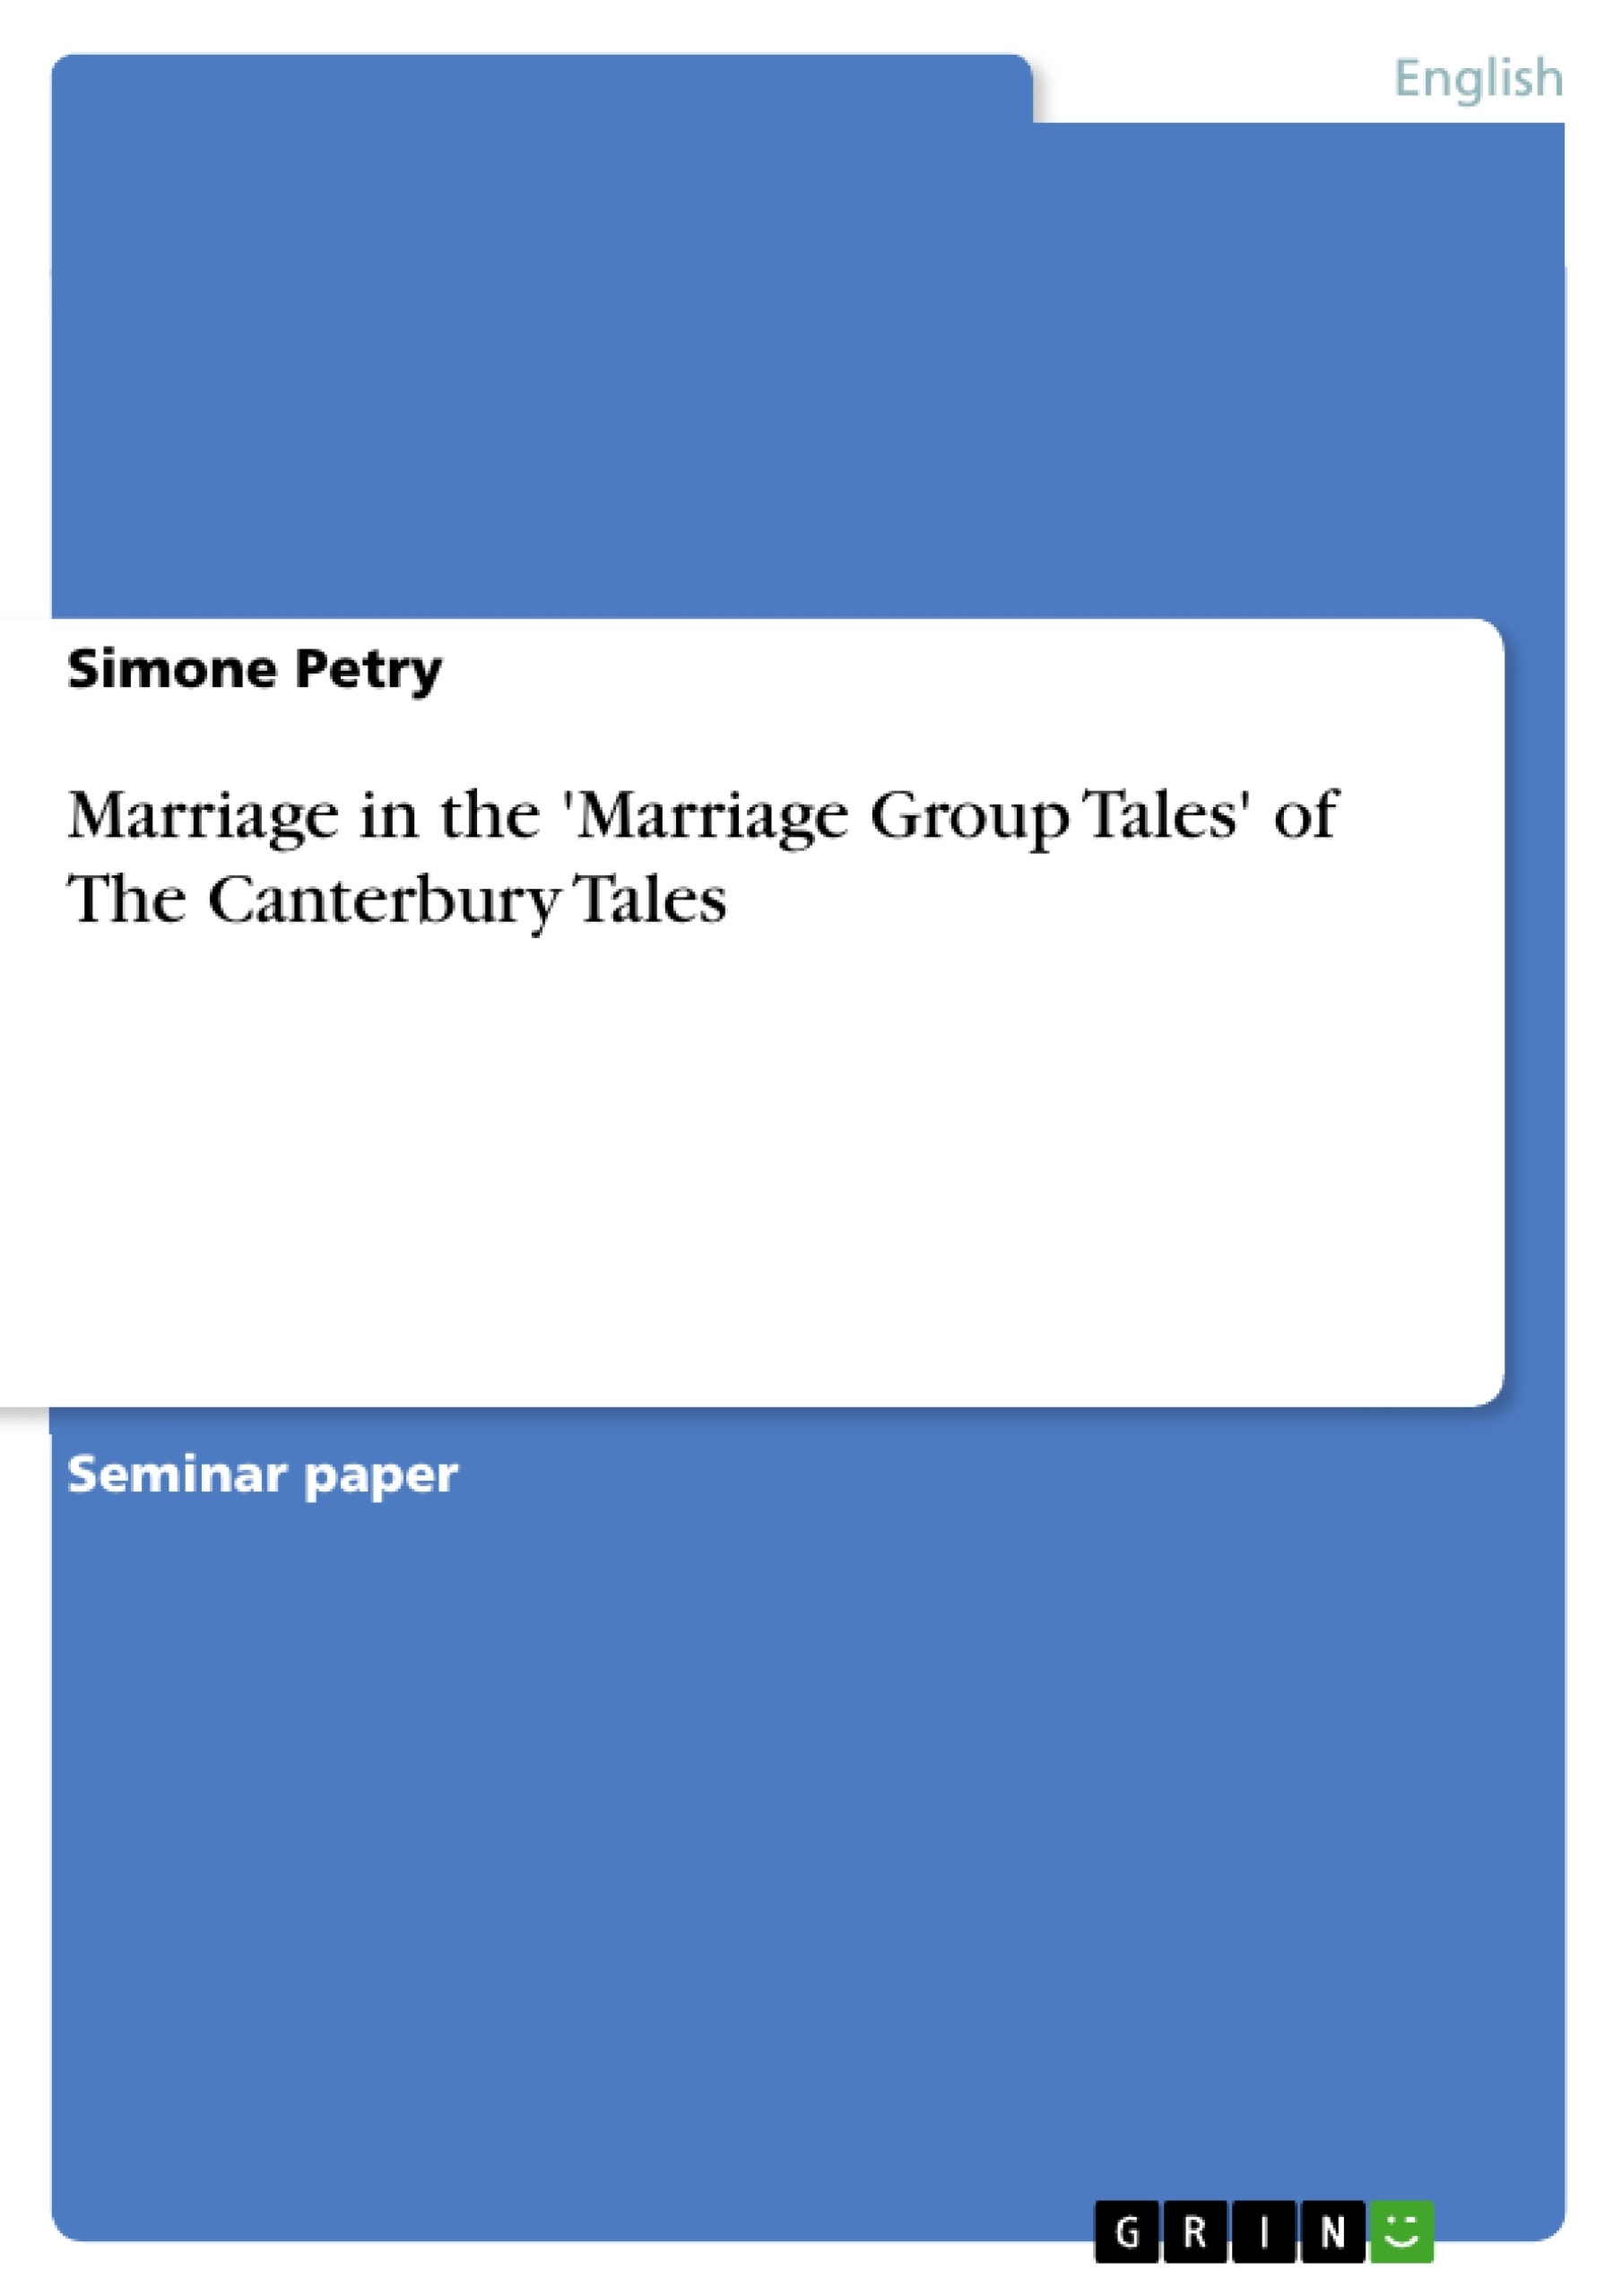 Título: Marriage in the 'Marriage Group Tales' of The Canterbury Tales